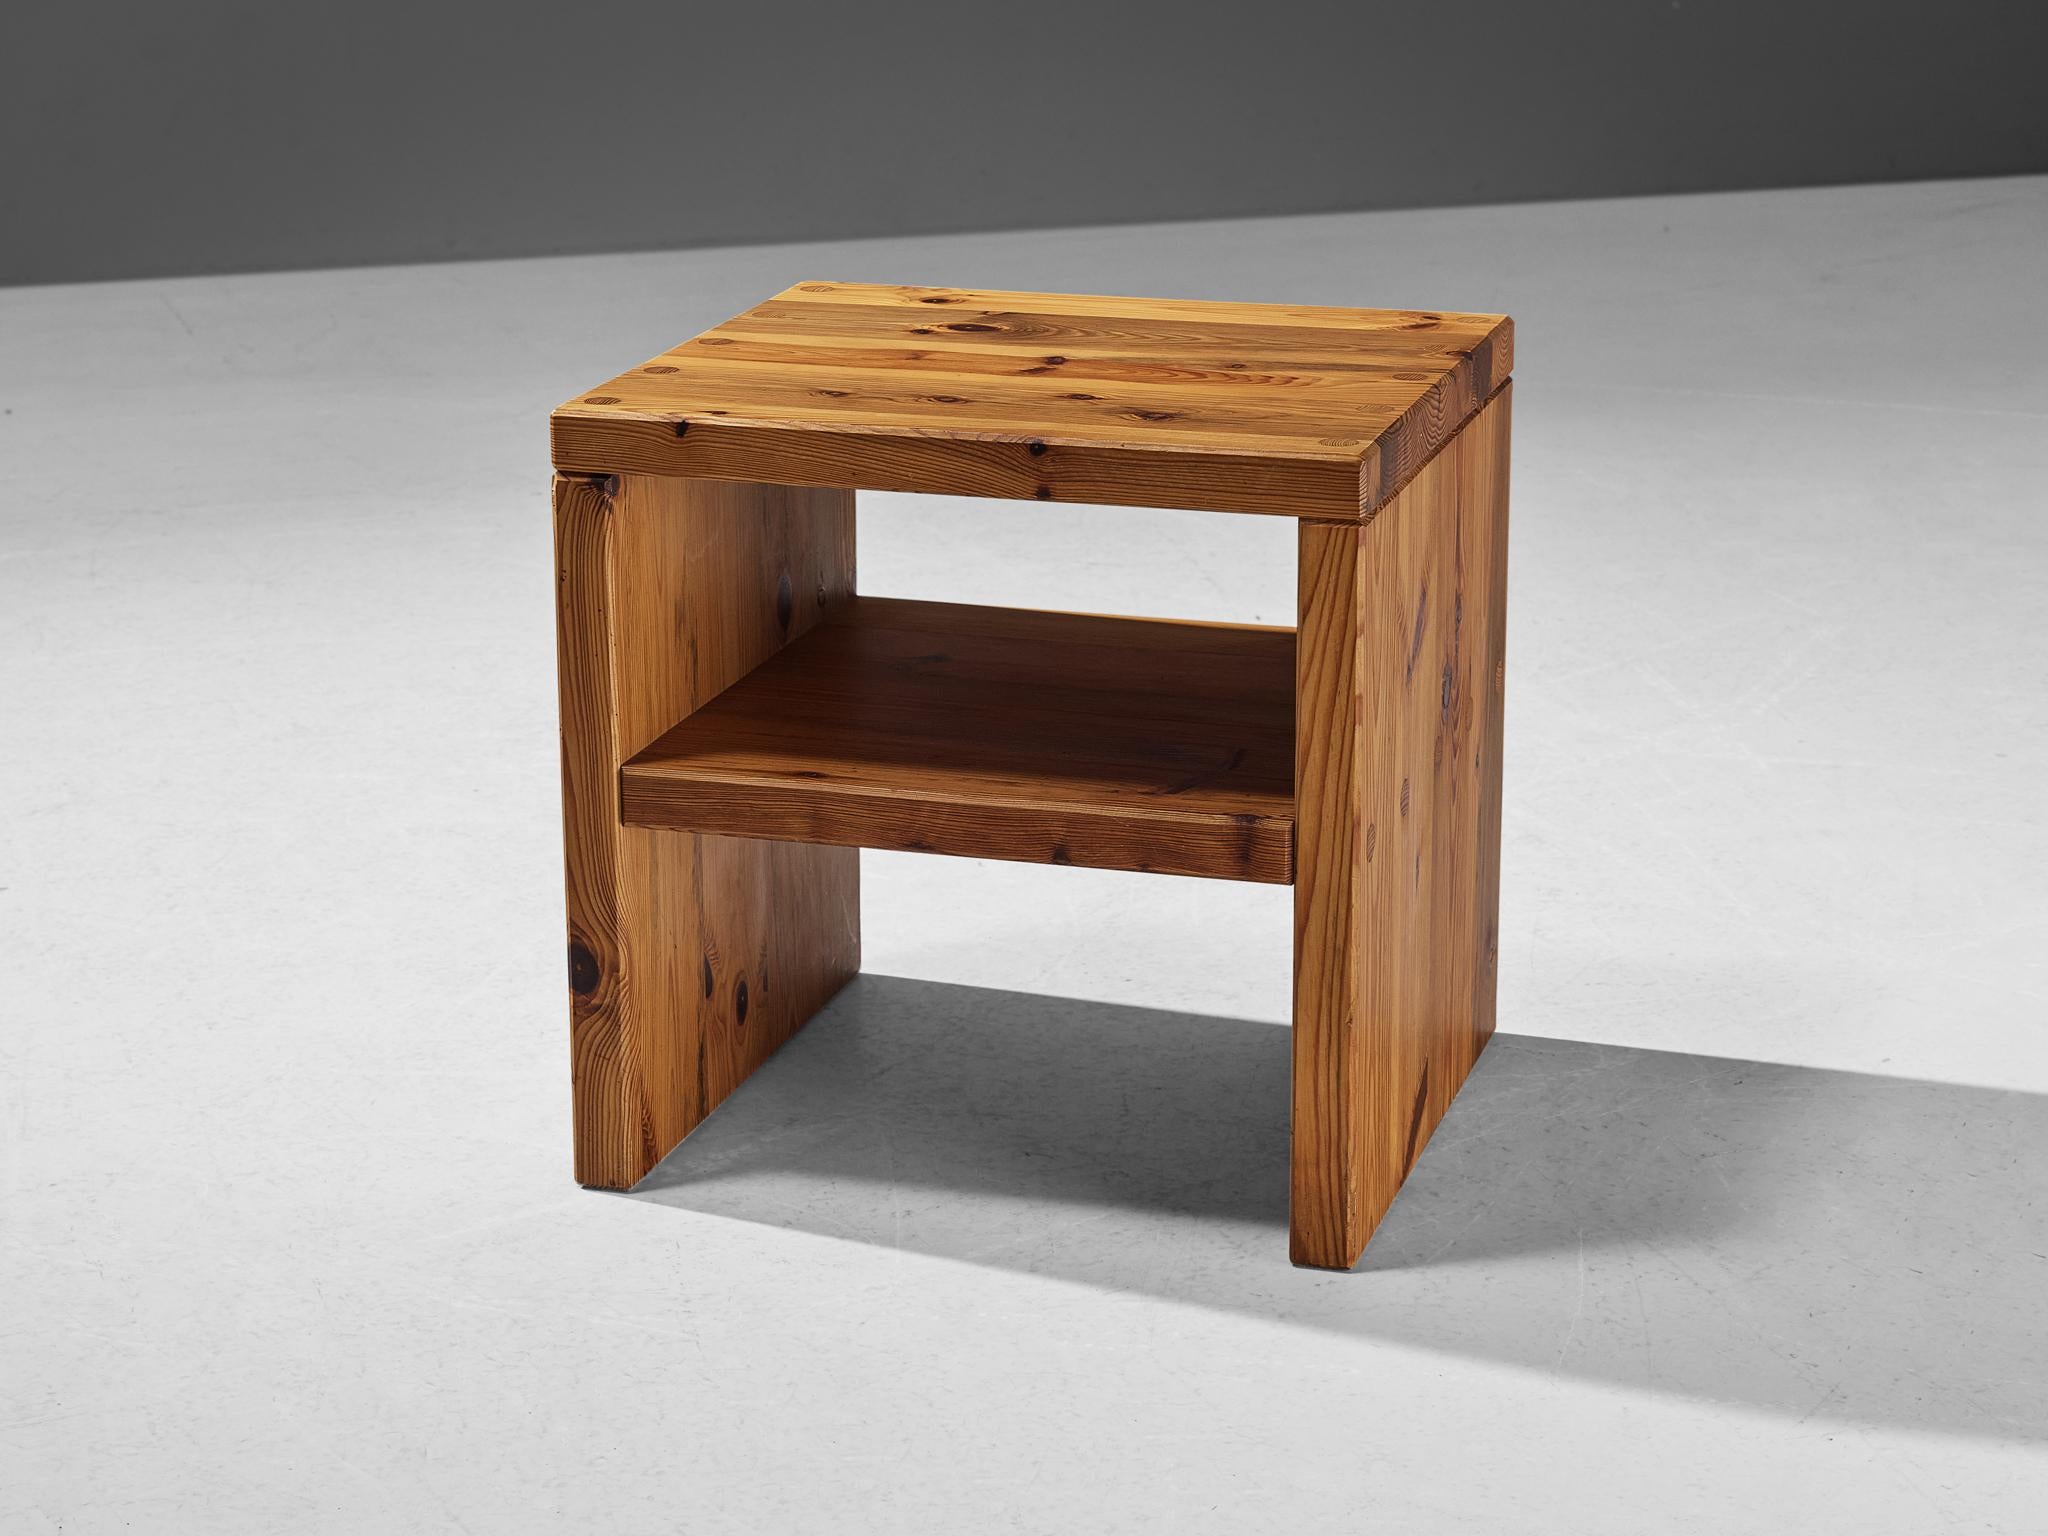 Roland Wilhelmsson for Karl Andersson & Söner, side table, pine, Sweden, 1970s
 
This side table with a solid and sturdy look is constructed in a precise manner implementing straight lines, resulting in a simplistic furniture piece that is typical